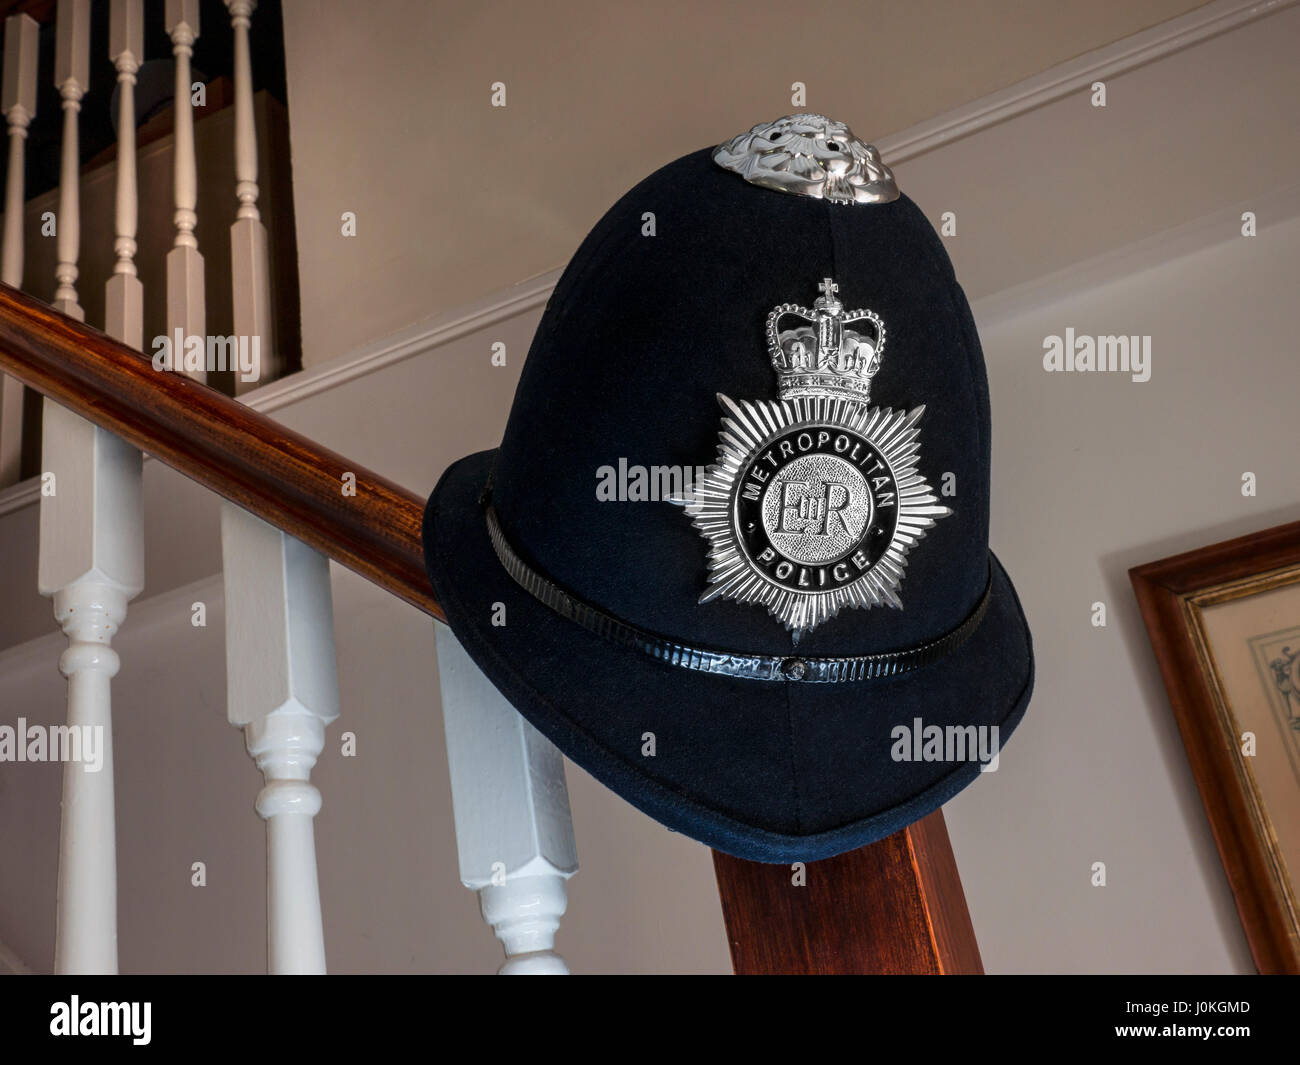 London Metropolitan Policeman's helmet and badge, on stair bannister in domestic 'end of day/interview' home living situation Stock Photo